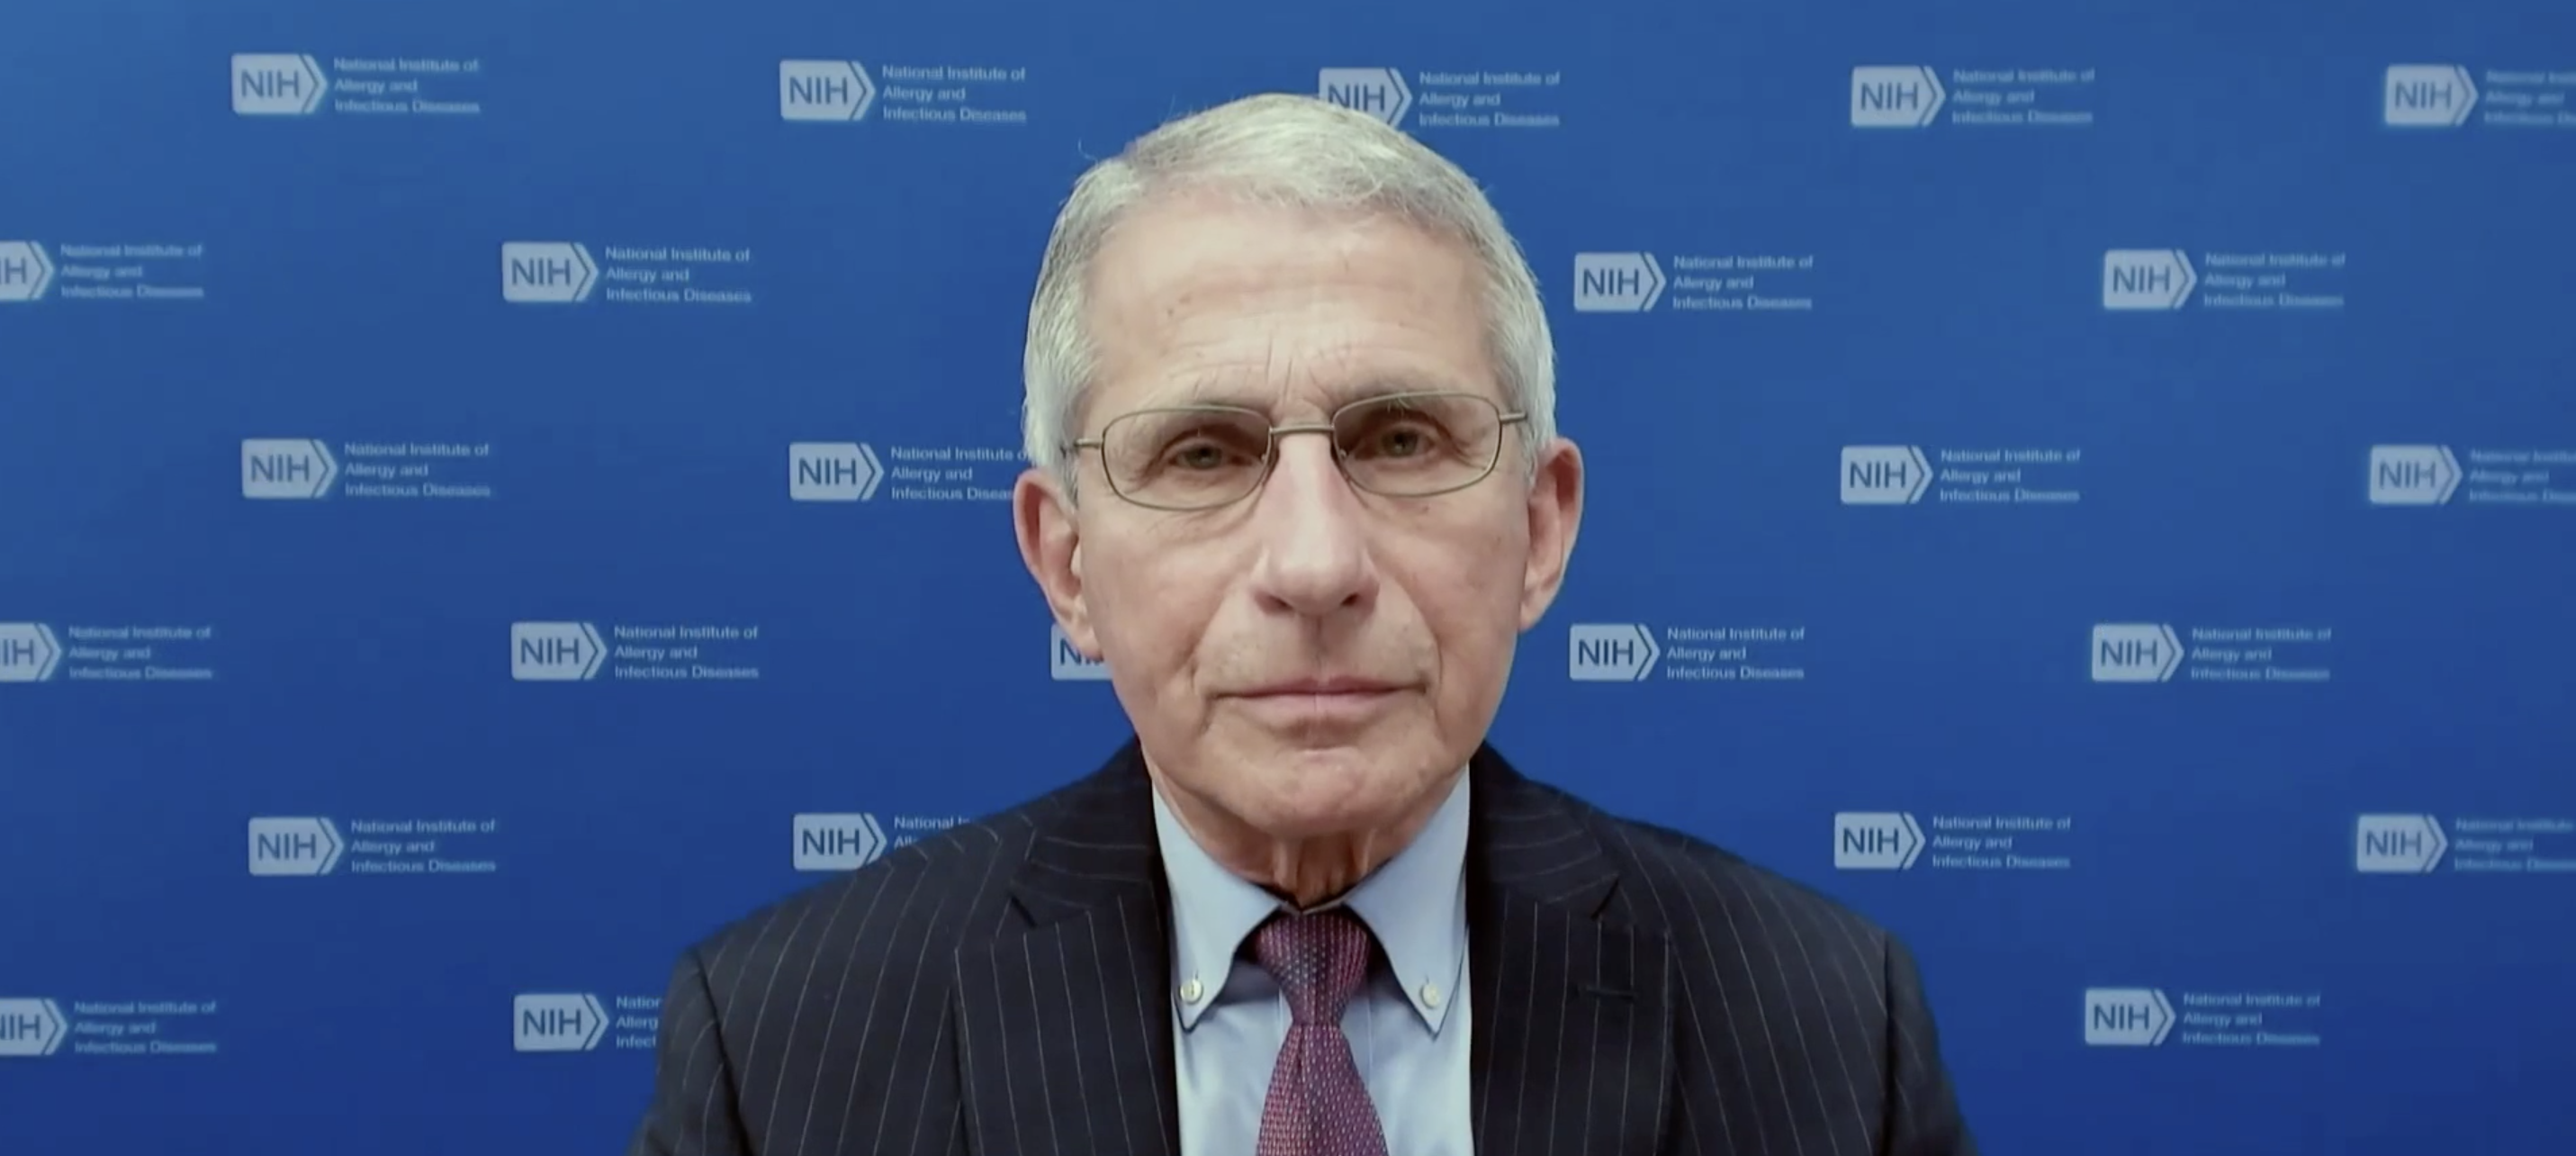 Dr Anthony Fauci, Director of the National Institute of Allergy and Infectious Diseases, in an interview with NBC's Today Show in mid February.